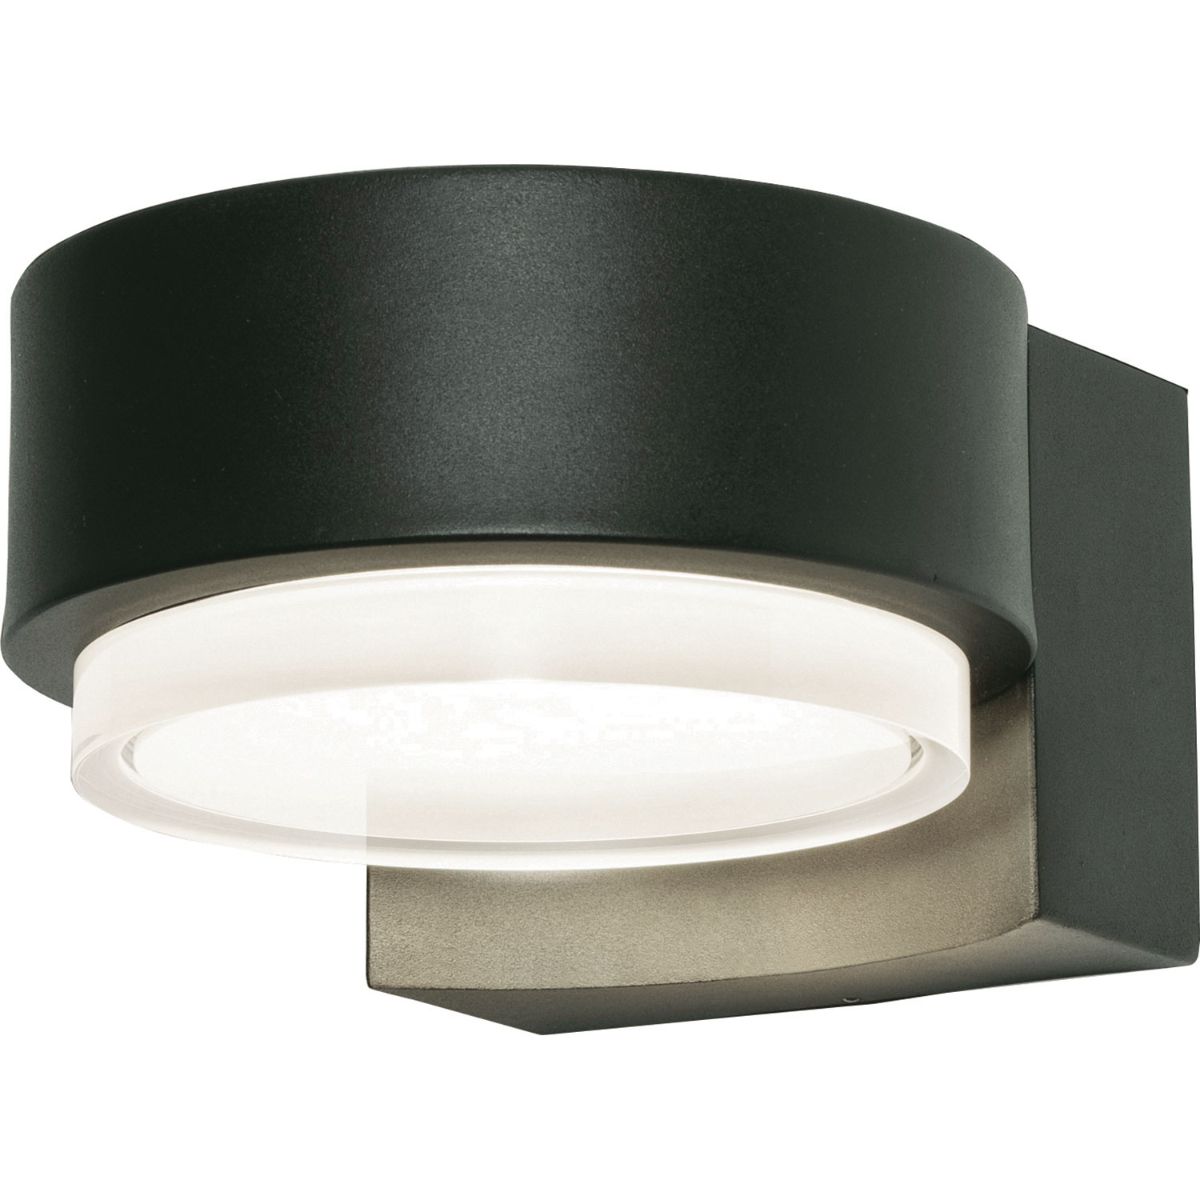 Elm 8 in. LED Outdoor Wall Sconce Selectable CCT Black Finish